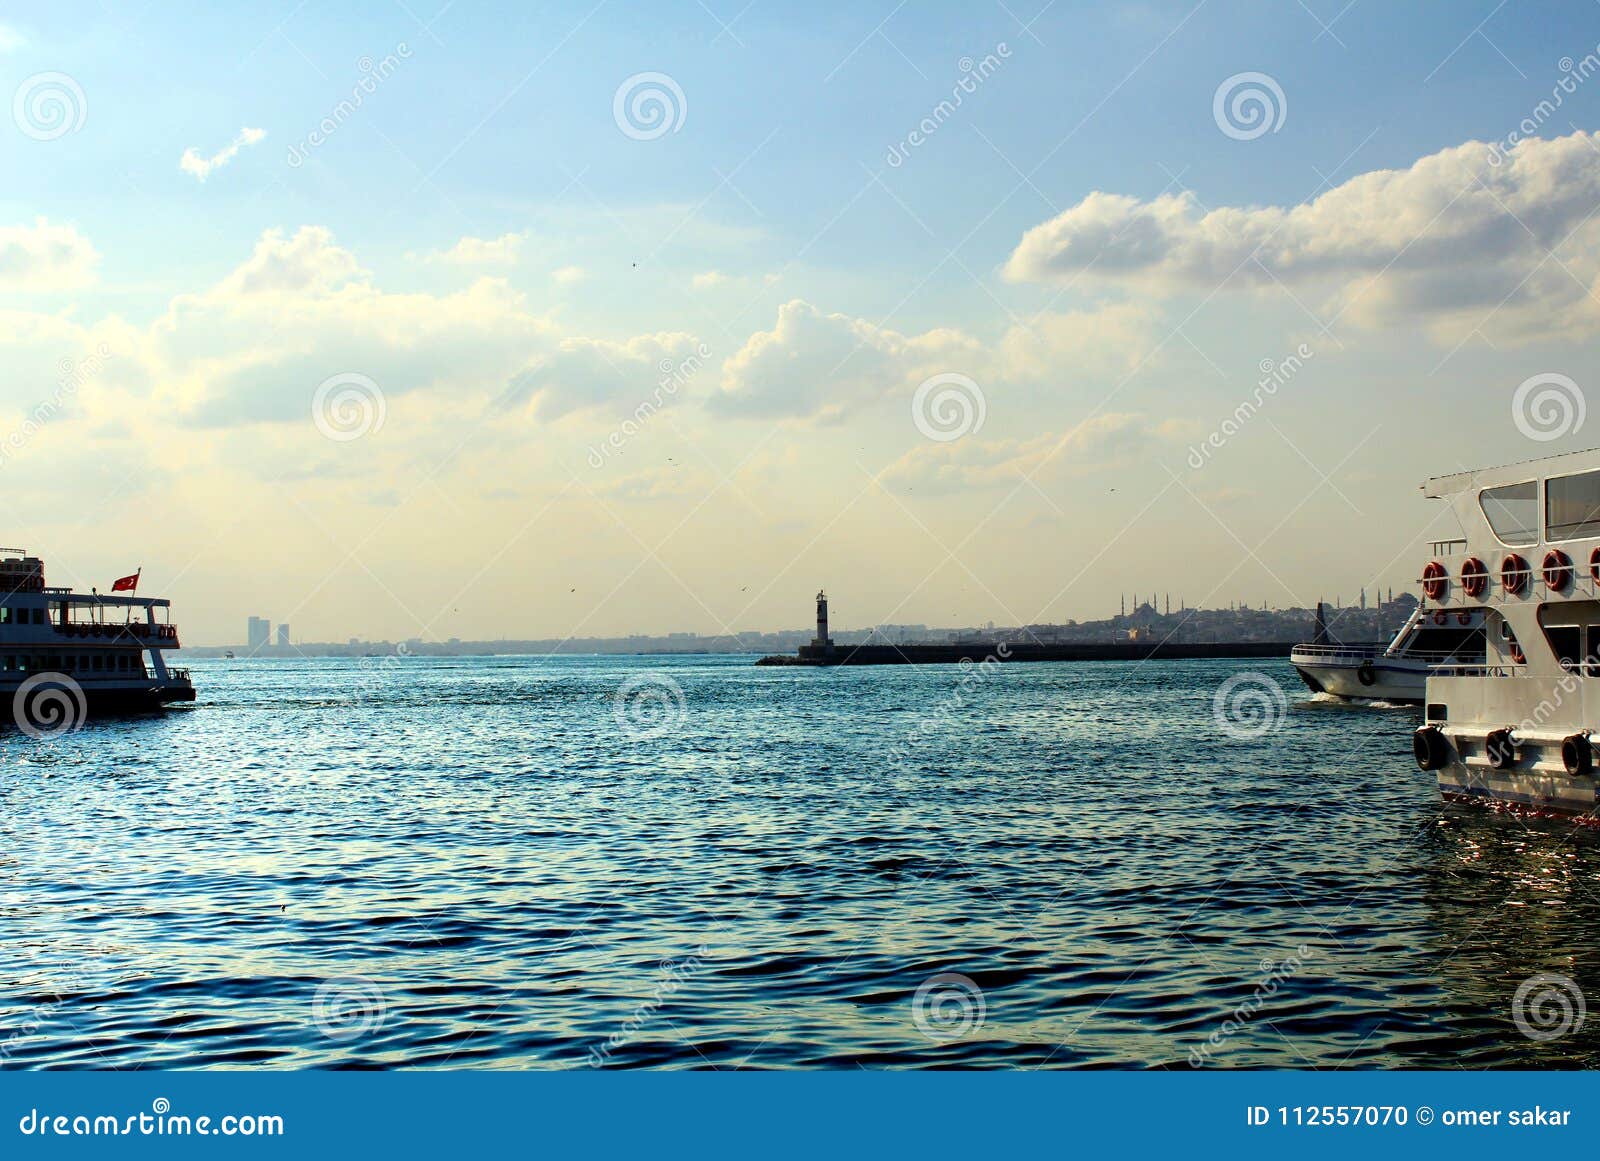 a view from kadikoy istanbul